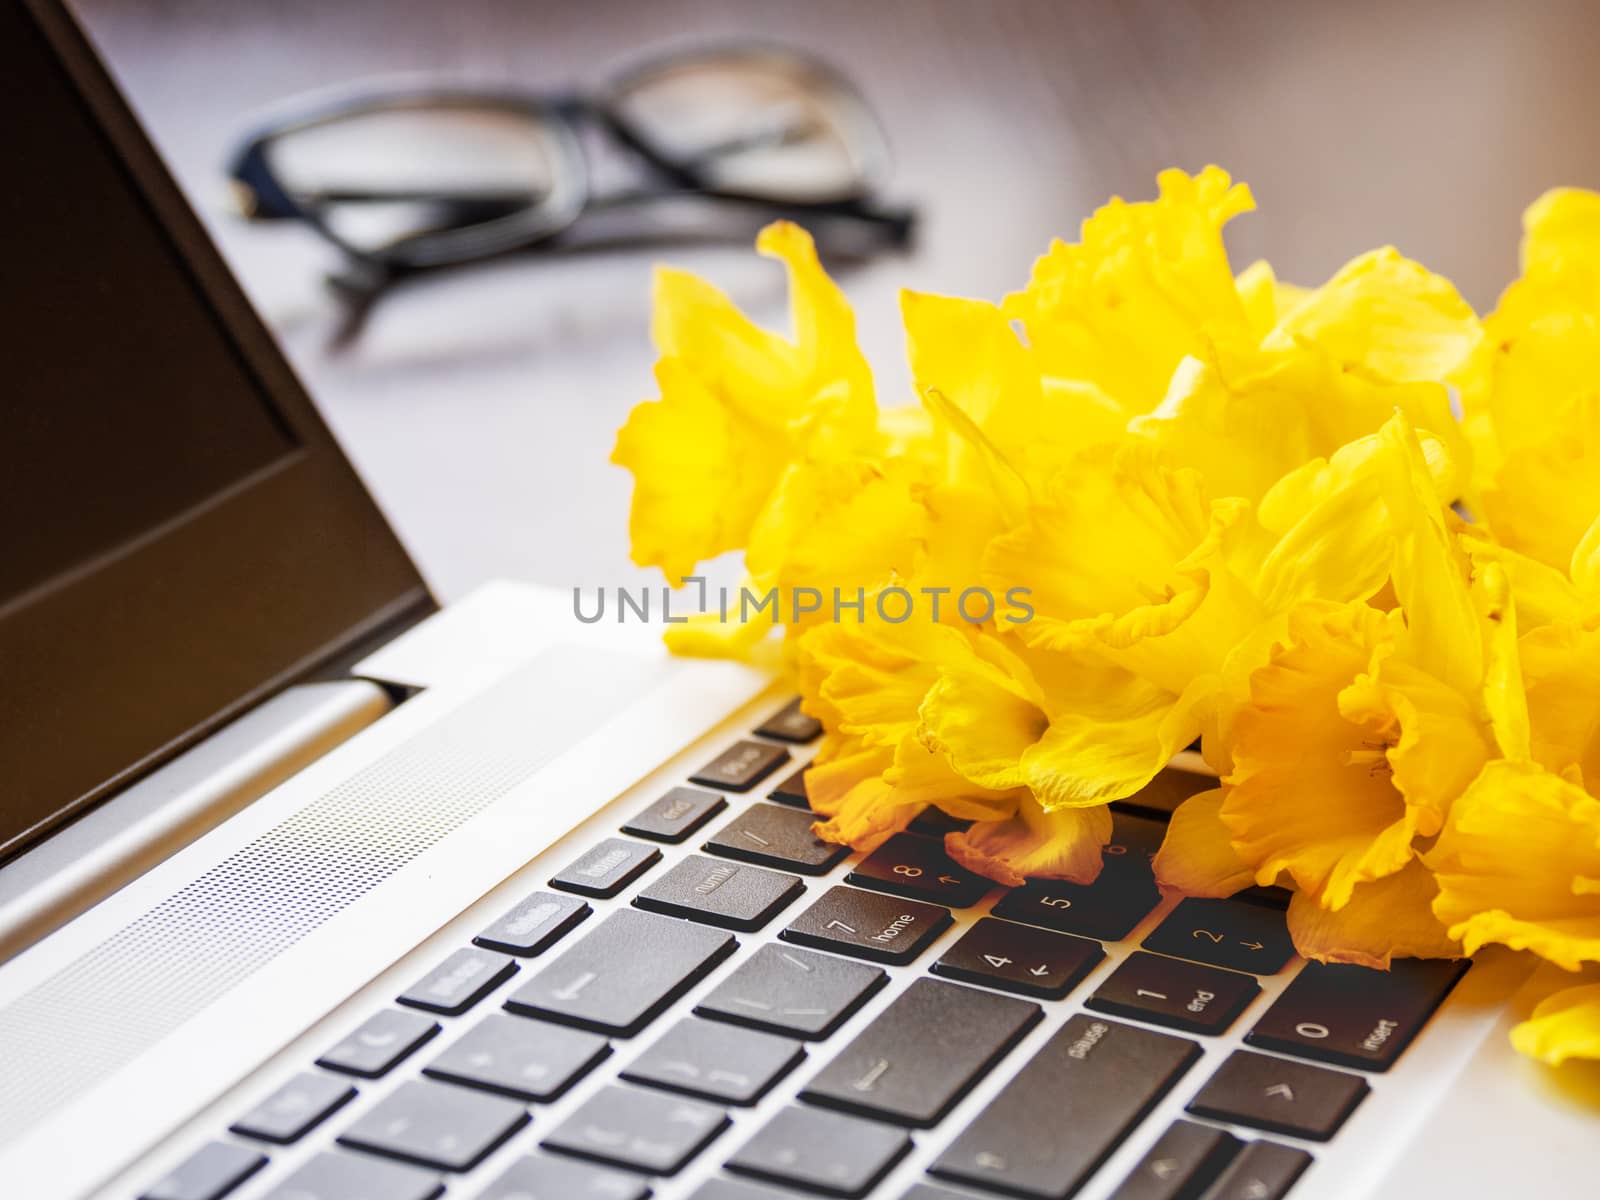 Bouquet of Narcissus or daffodils lying on silver metal laptop. Bright yellow flowers on portable device. Wooden background with glasses.